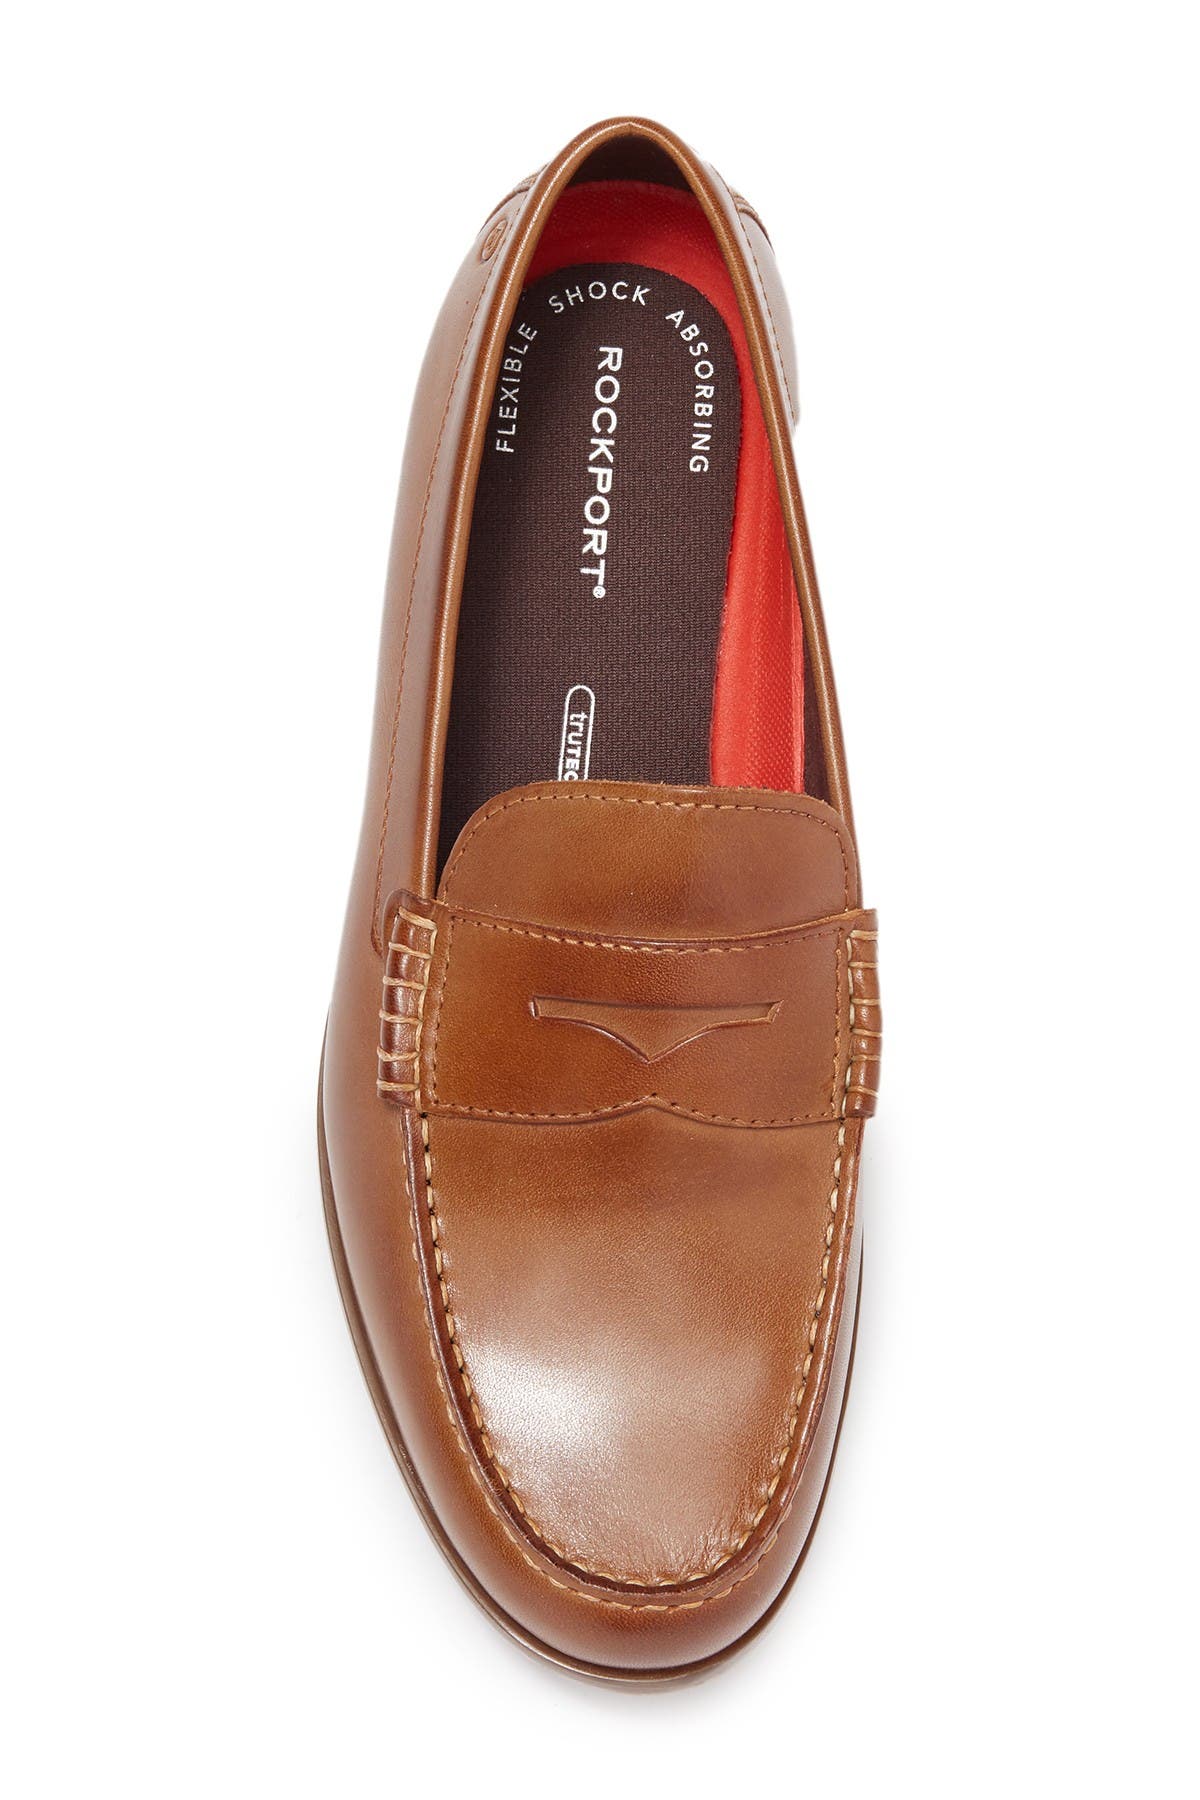 rockport curtys penny loafer